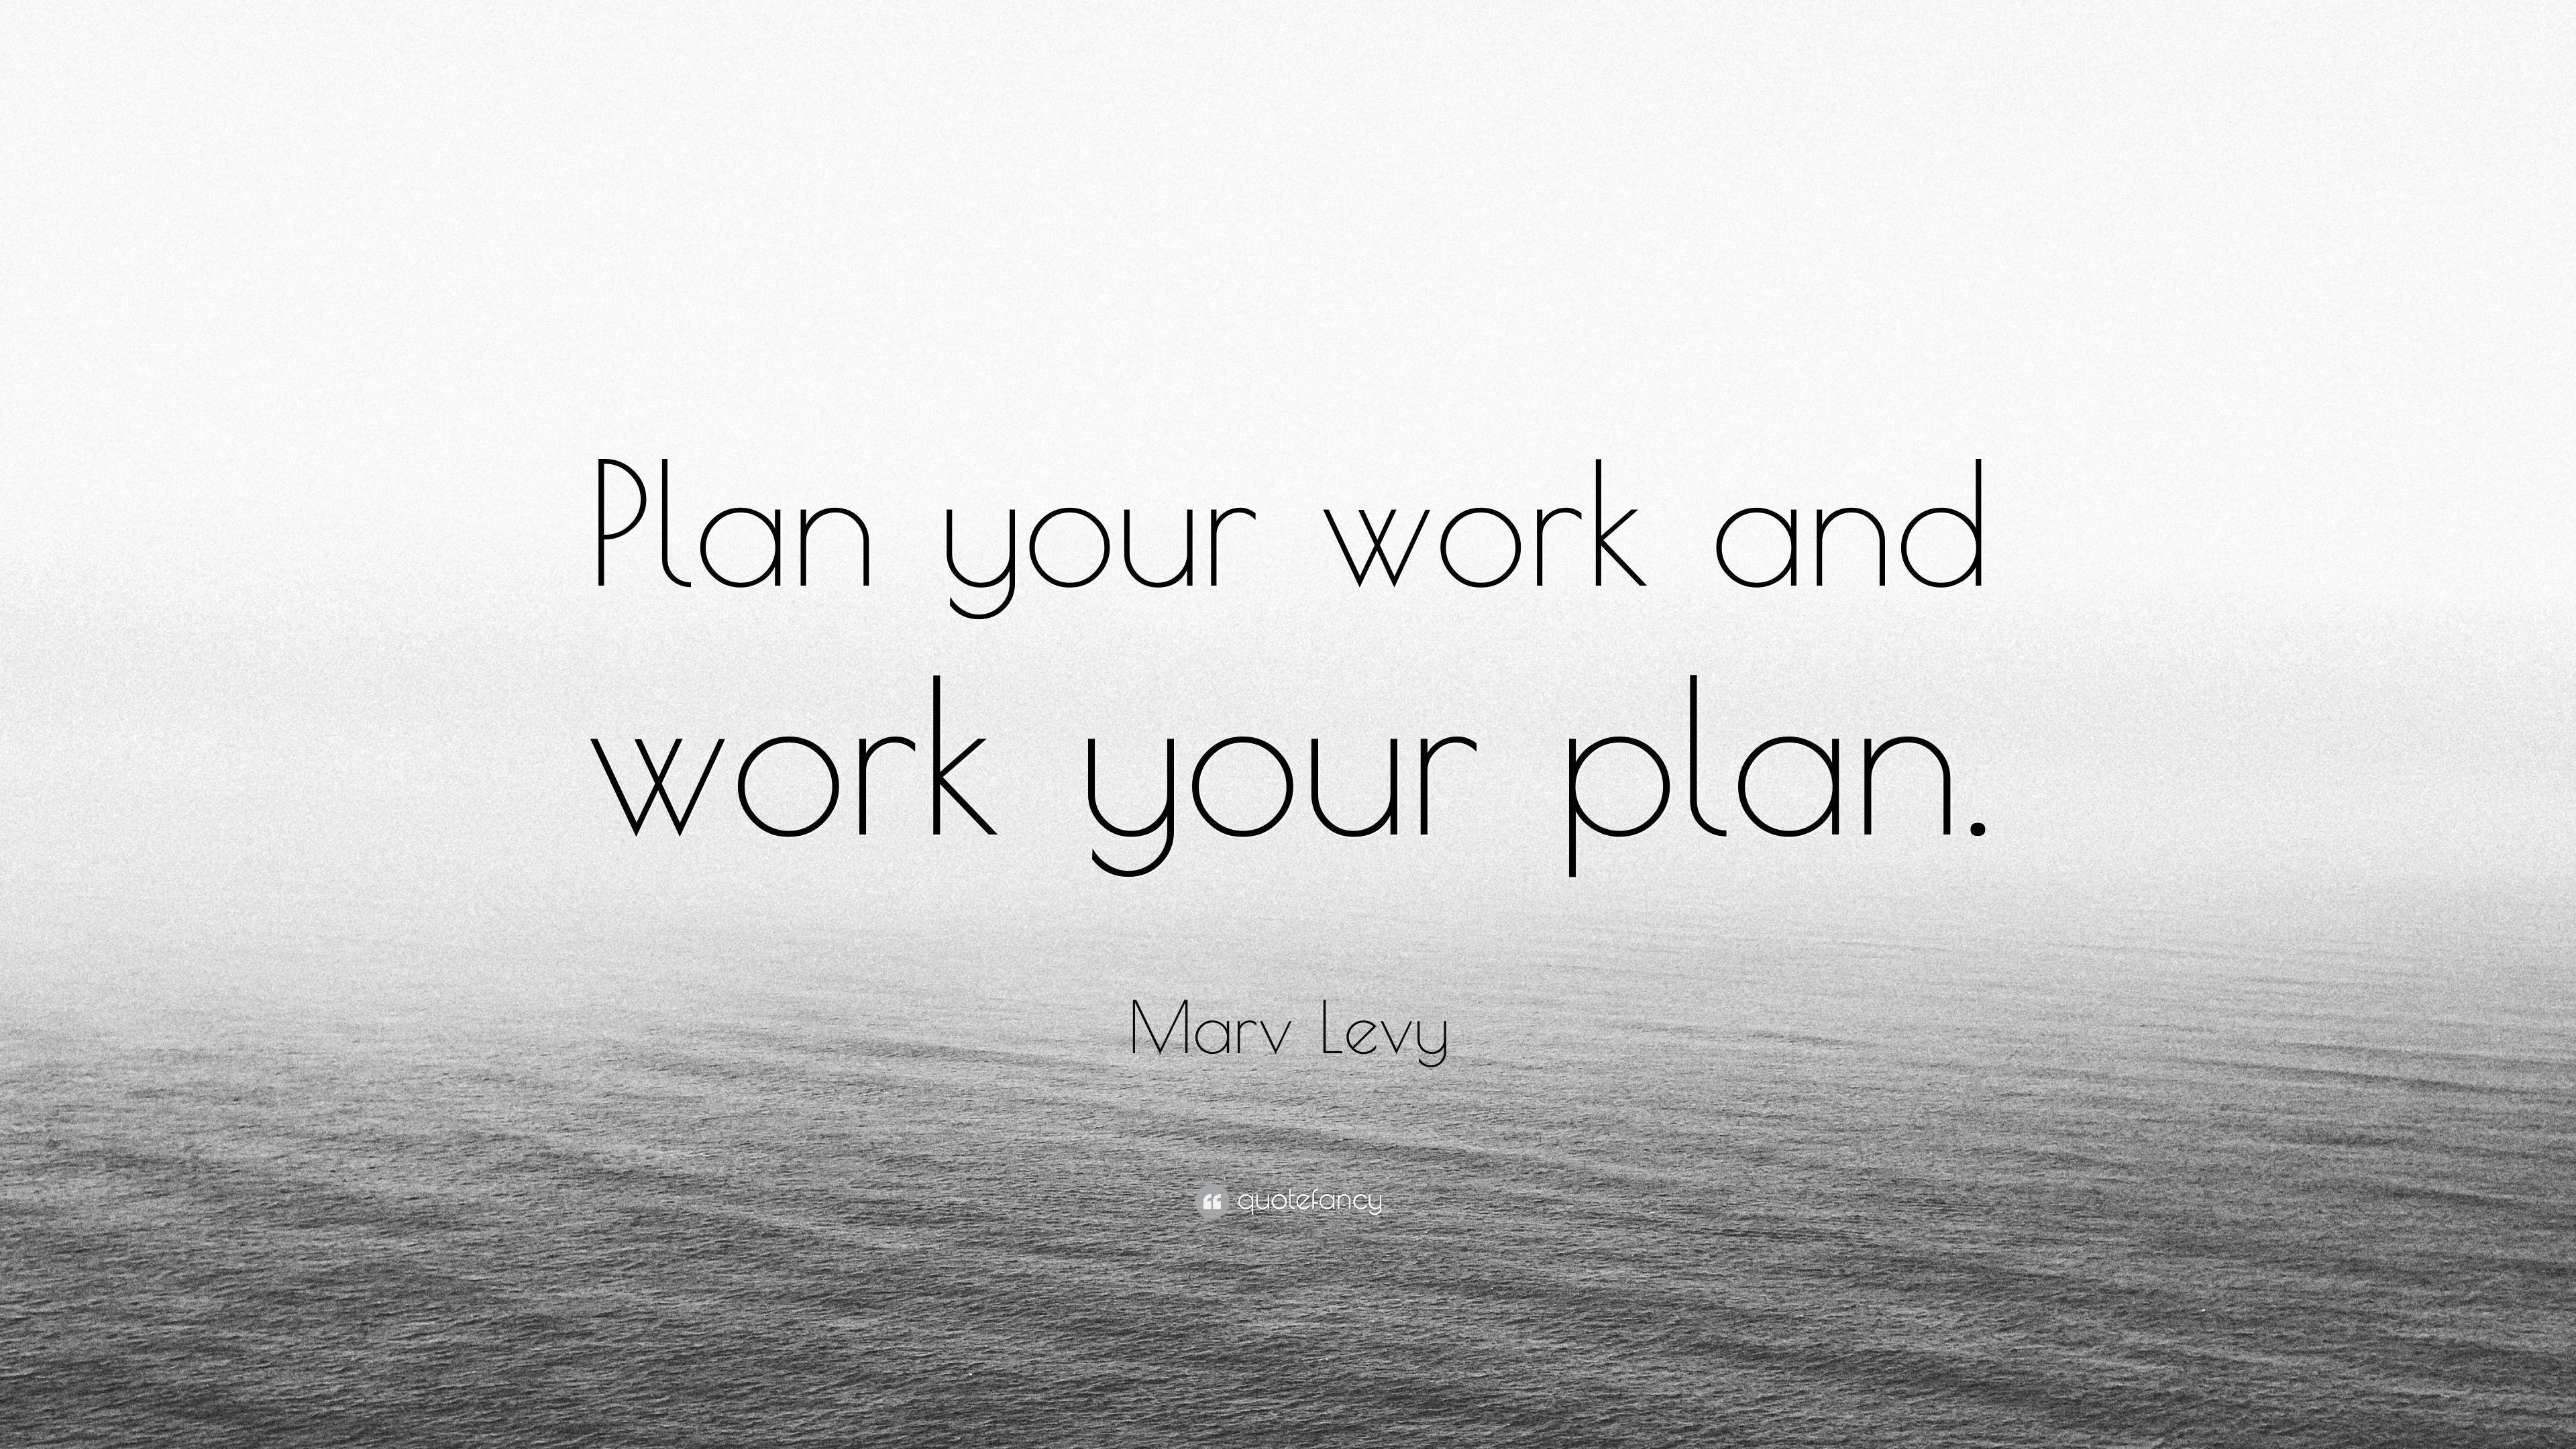 Marv Levy Quote: “Plan your work and work your plan.” 7 wallpaper